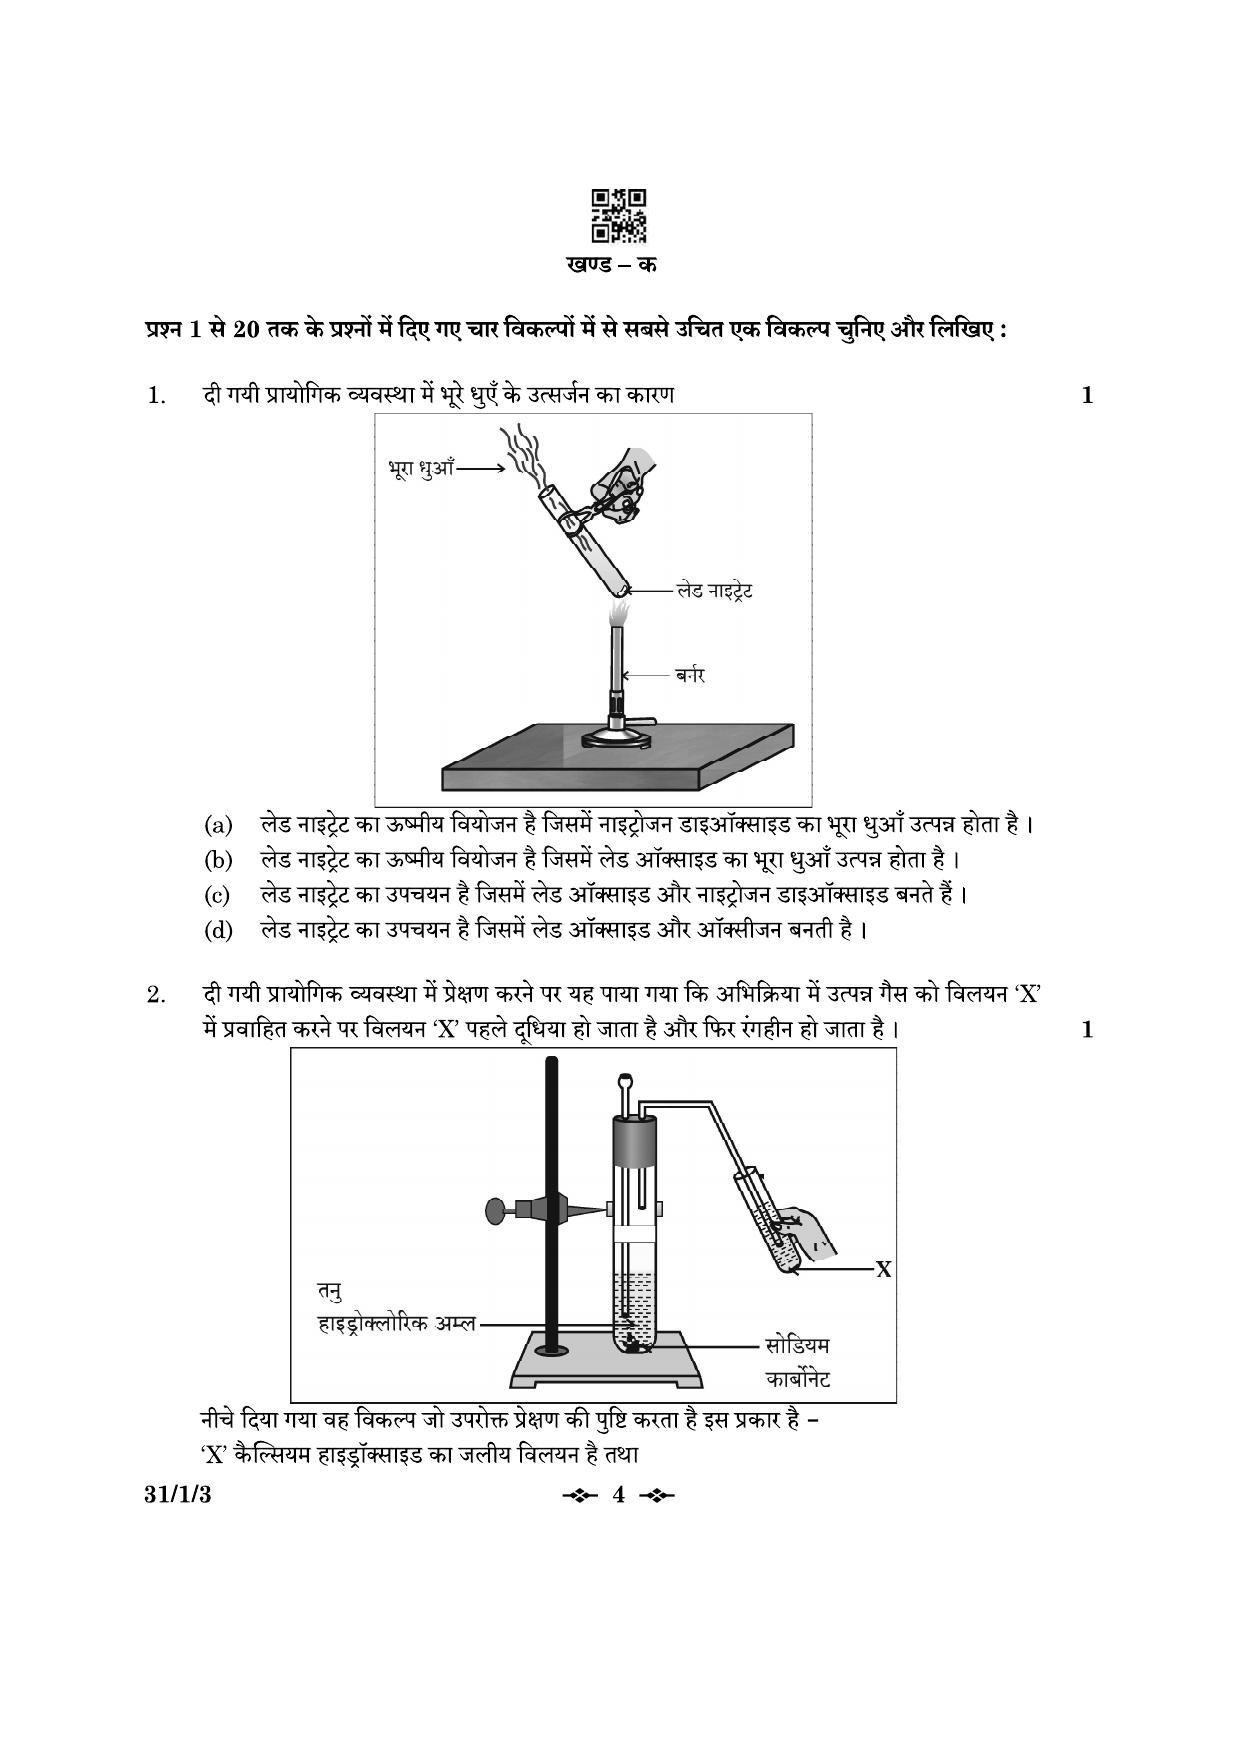 CBSE Class 10 31-1-3 Science 2023 Question Paper - Page 4